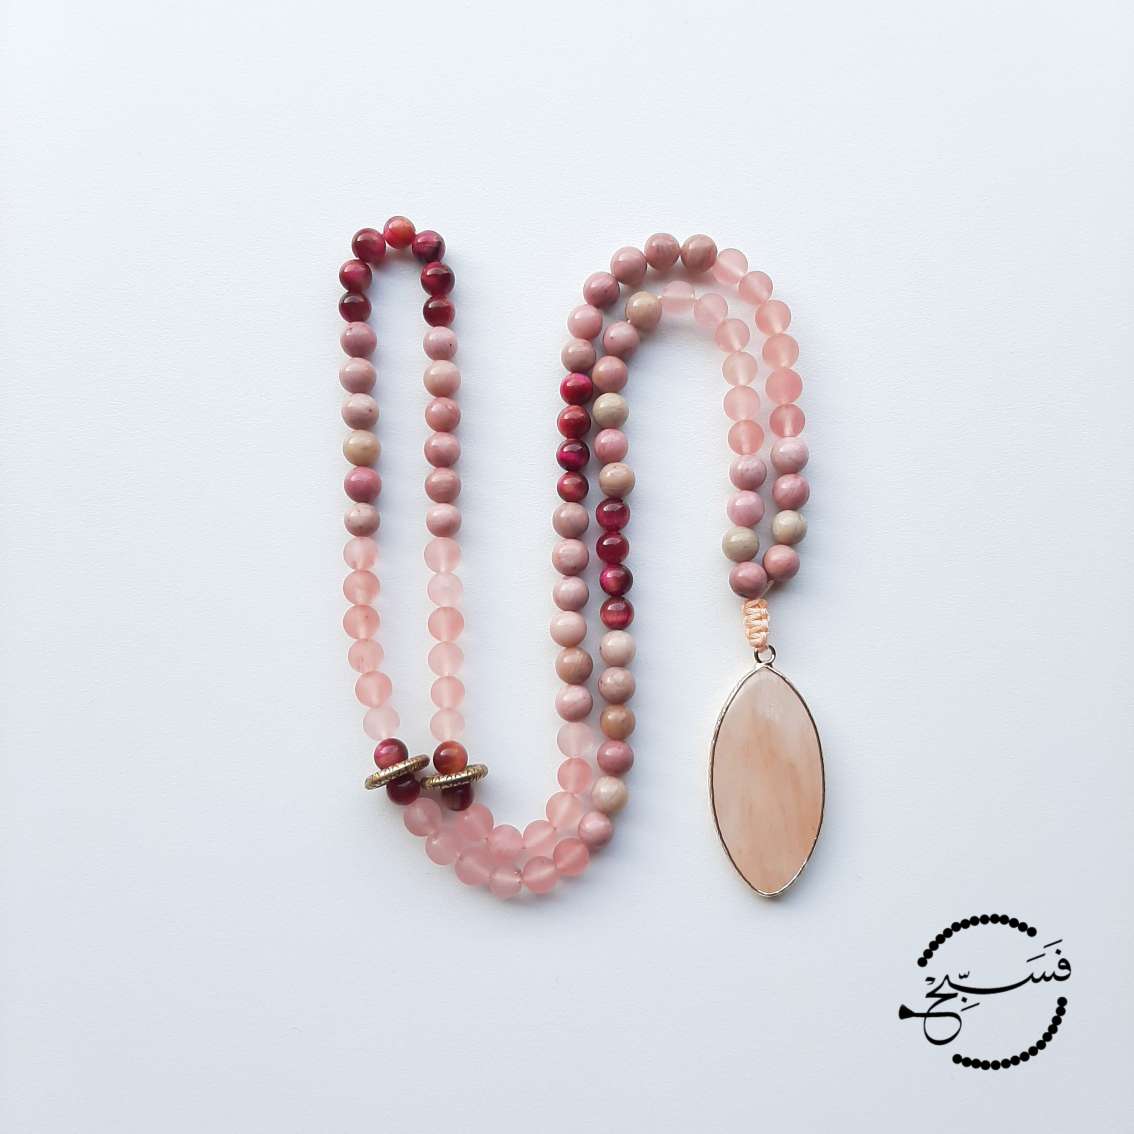 This piece is made from watermelon quartz, pink rhodonite and rose tiger eye beads. A beautifully shaped quartz pendant completes the piece.  Packaged in a luxurious pouch and a gift box.  99 beads